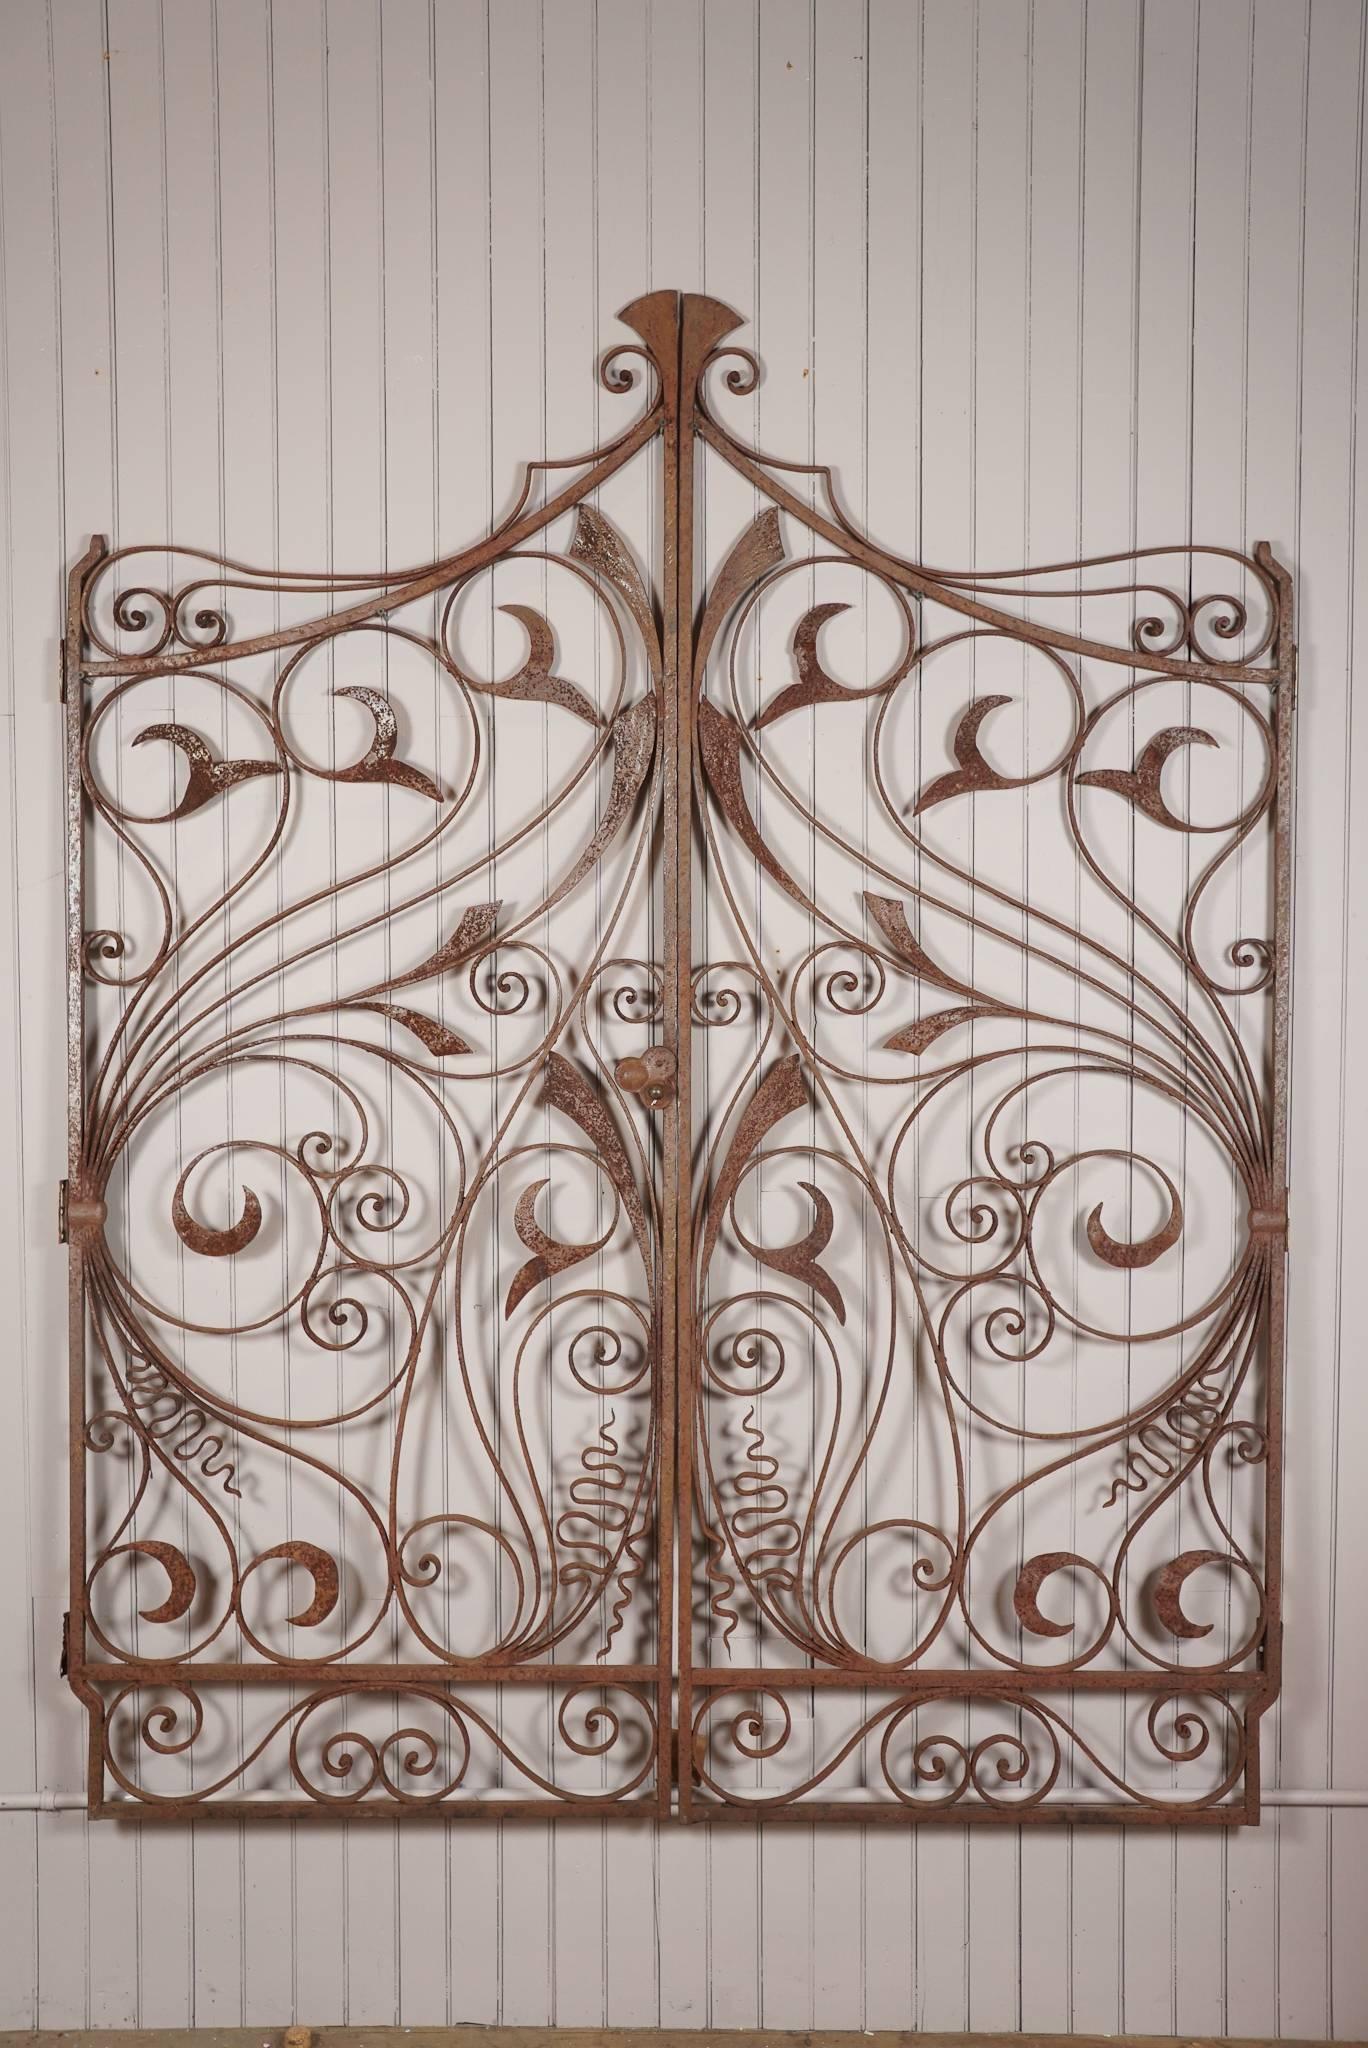 Pair of delicate and intrinsically designed floral motif Art Nouveau wrought iron gates - rusted patina - found in Maine.